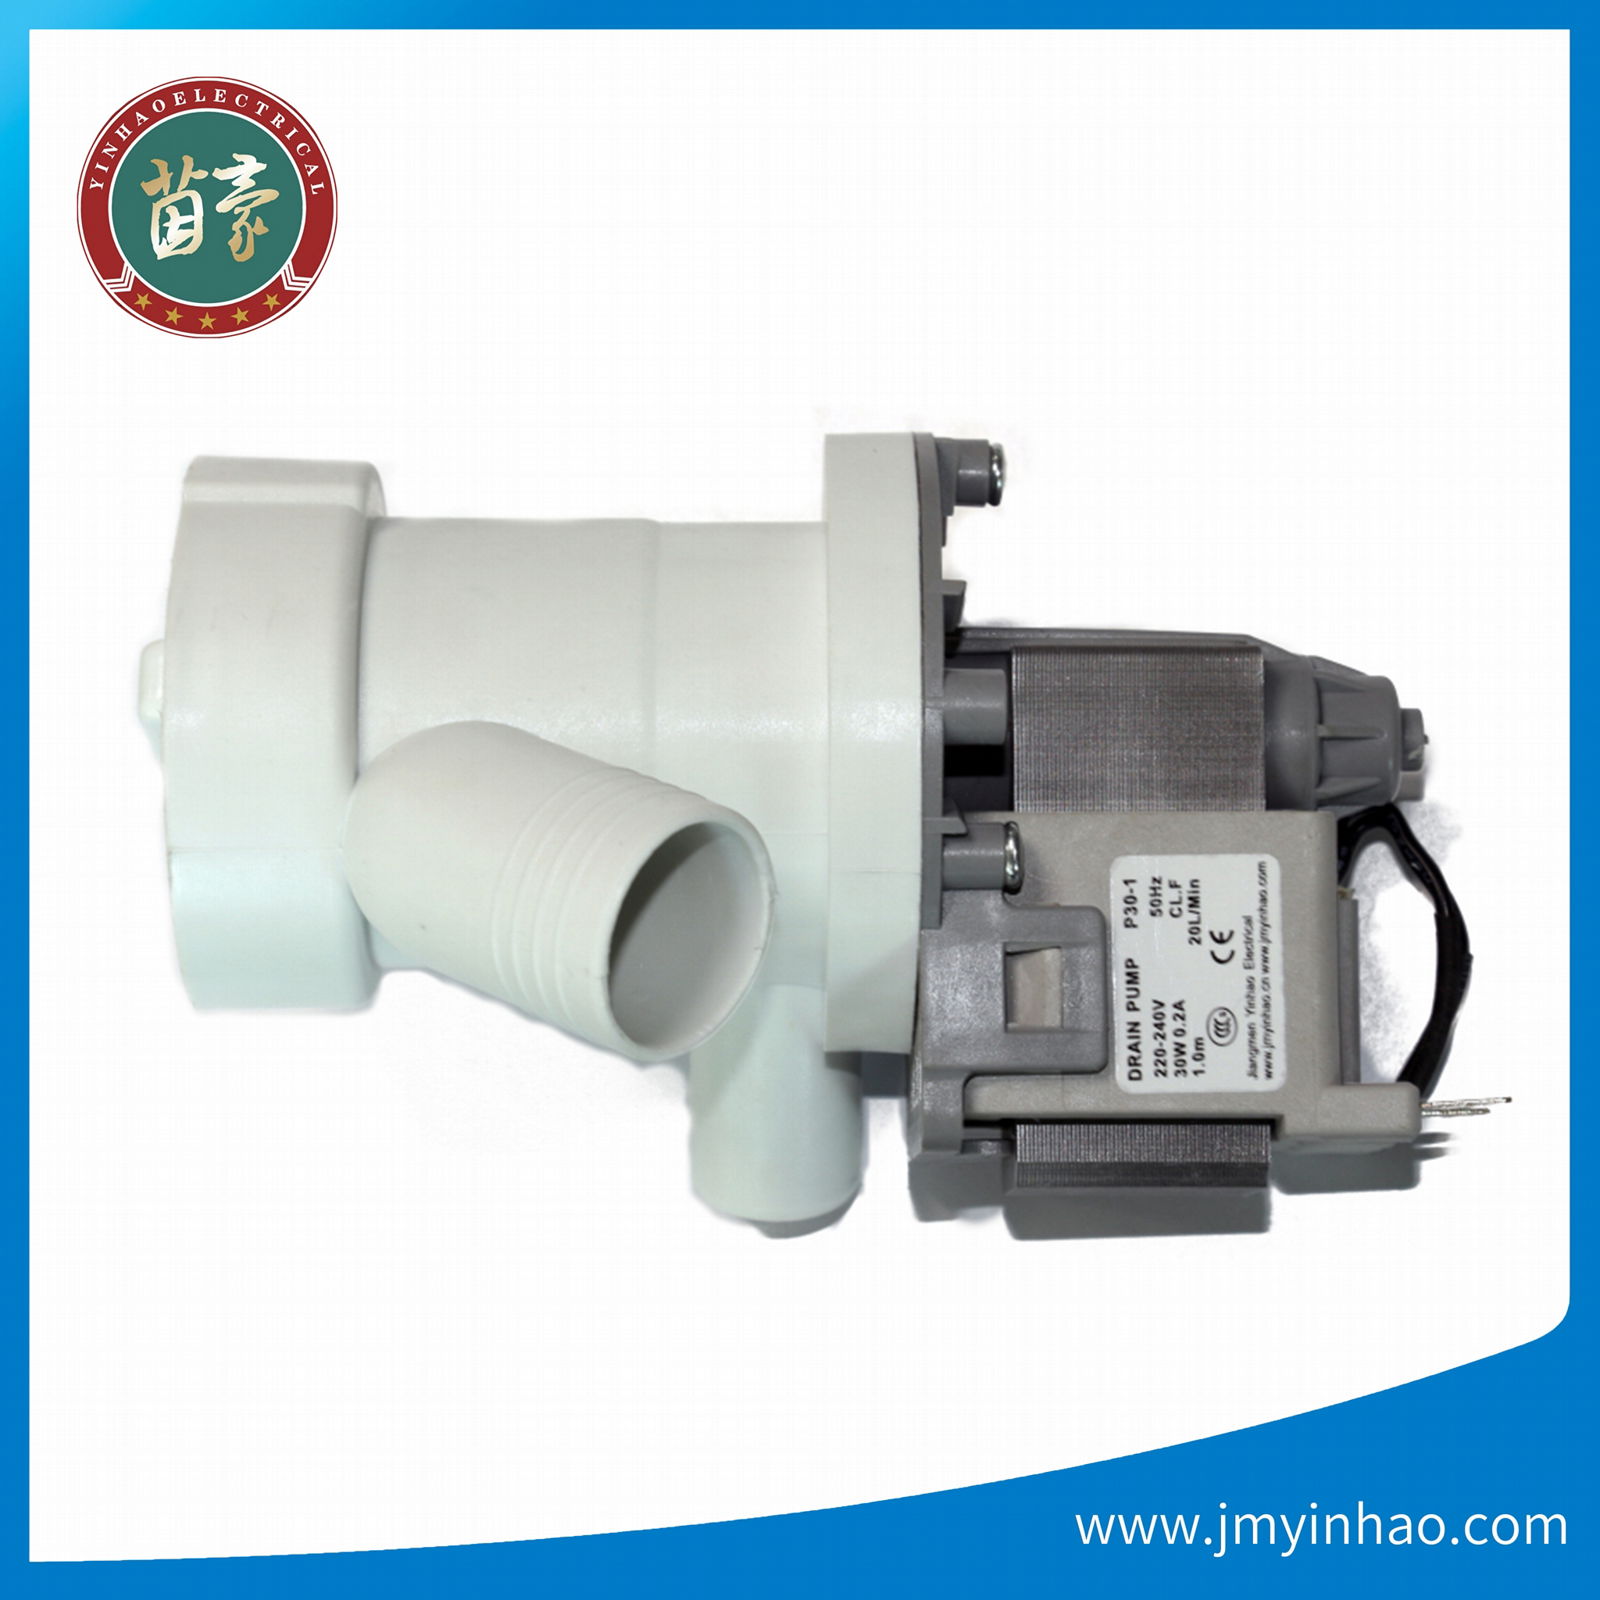 Permanent magnet synchronous drain pump for washing machine 2